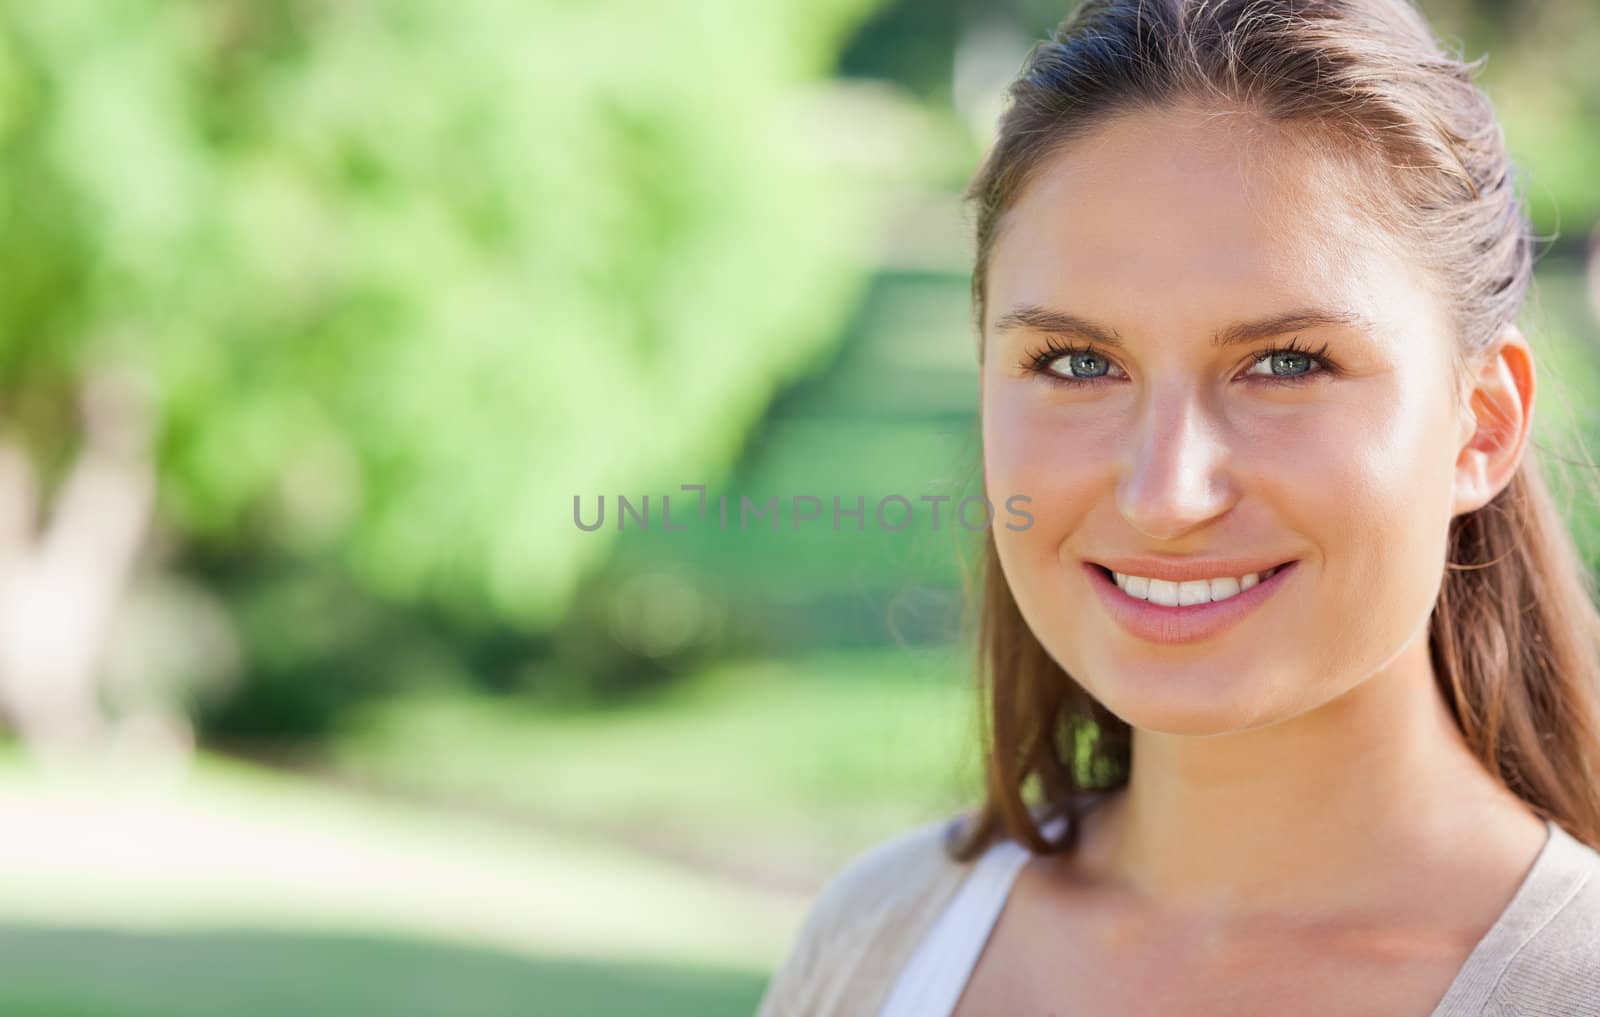 Smiling woman spending her day in the park by Wavebreakmedia